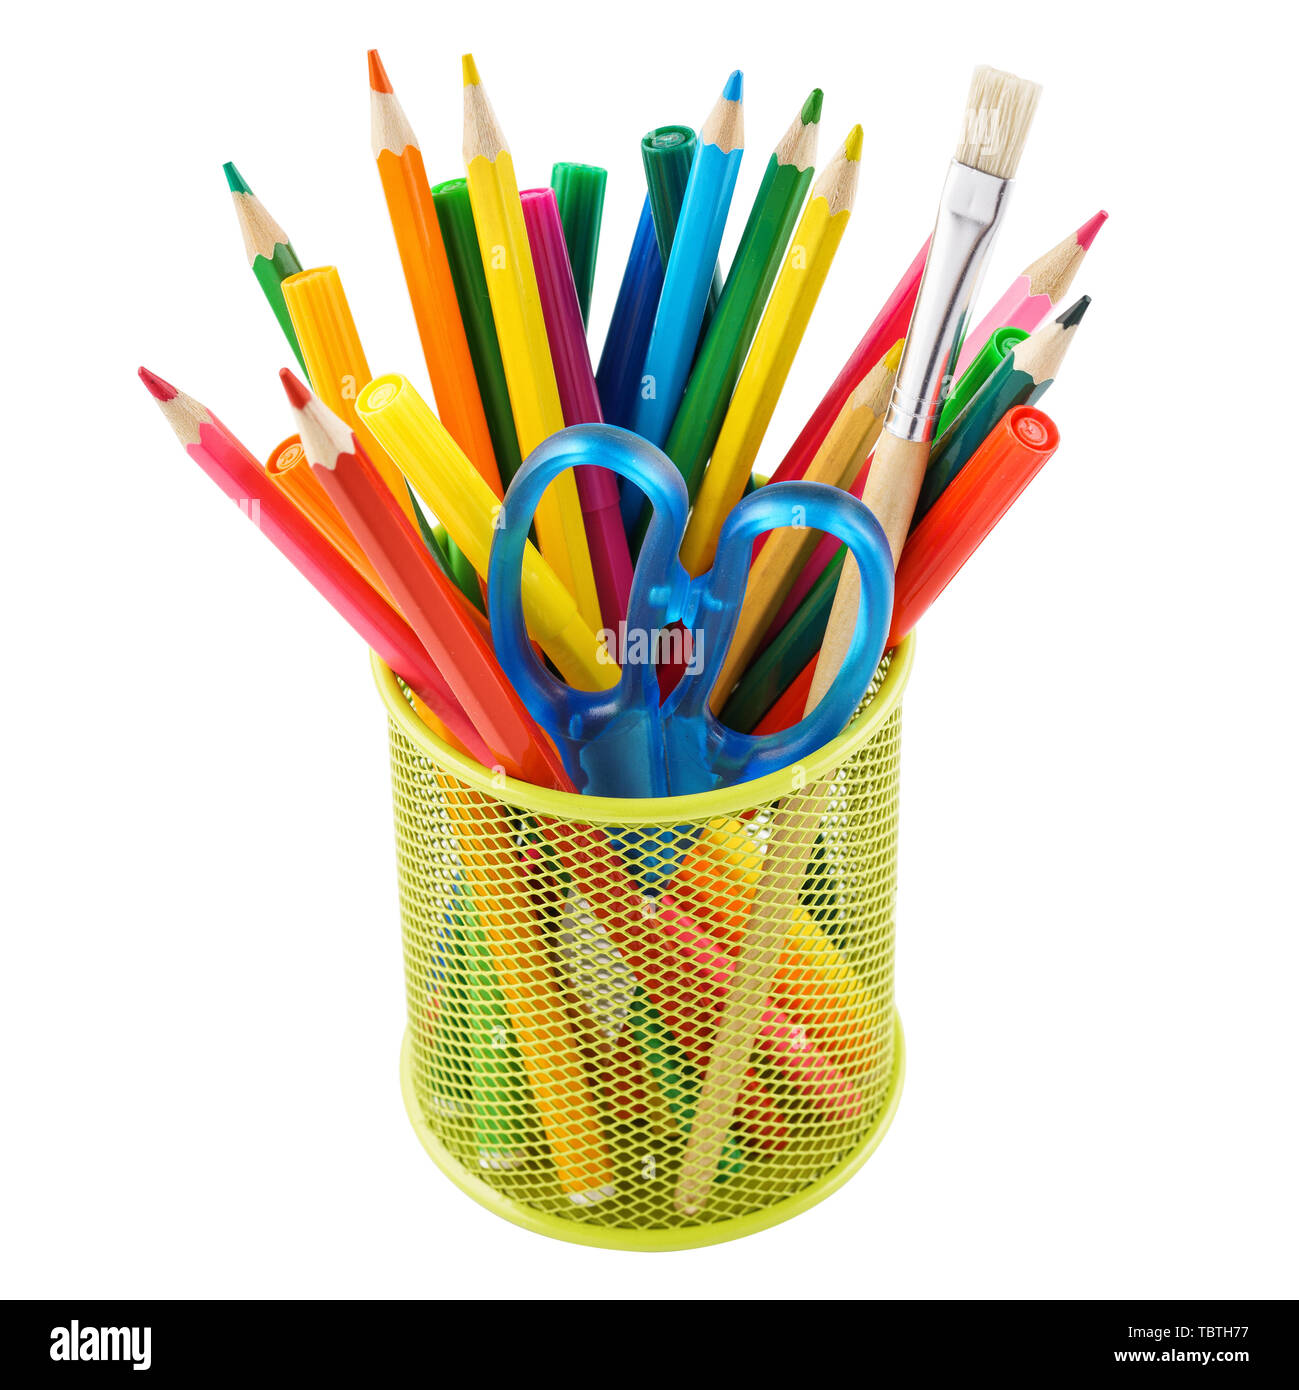 Colored pencils and various colorful stationery for school in a metal holder or cup. Isolated on white. Stock Photo